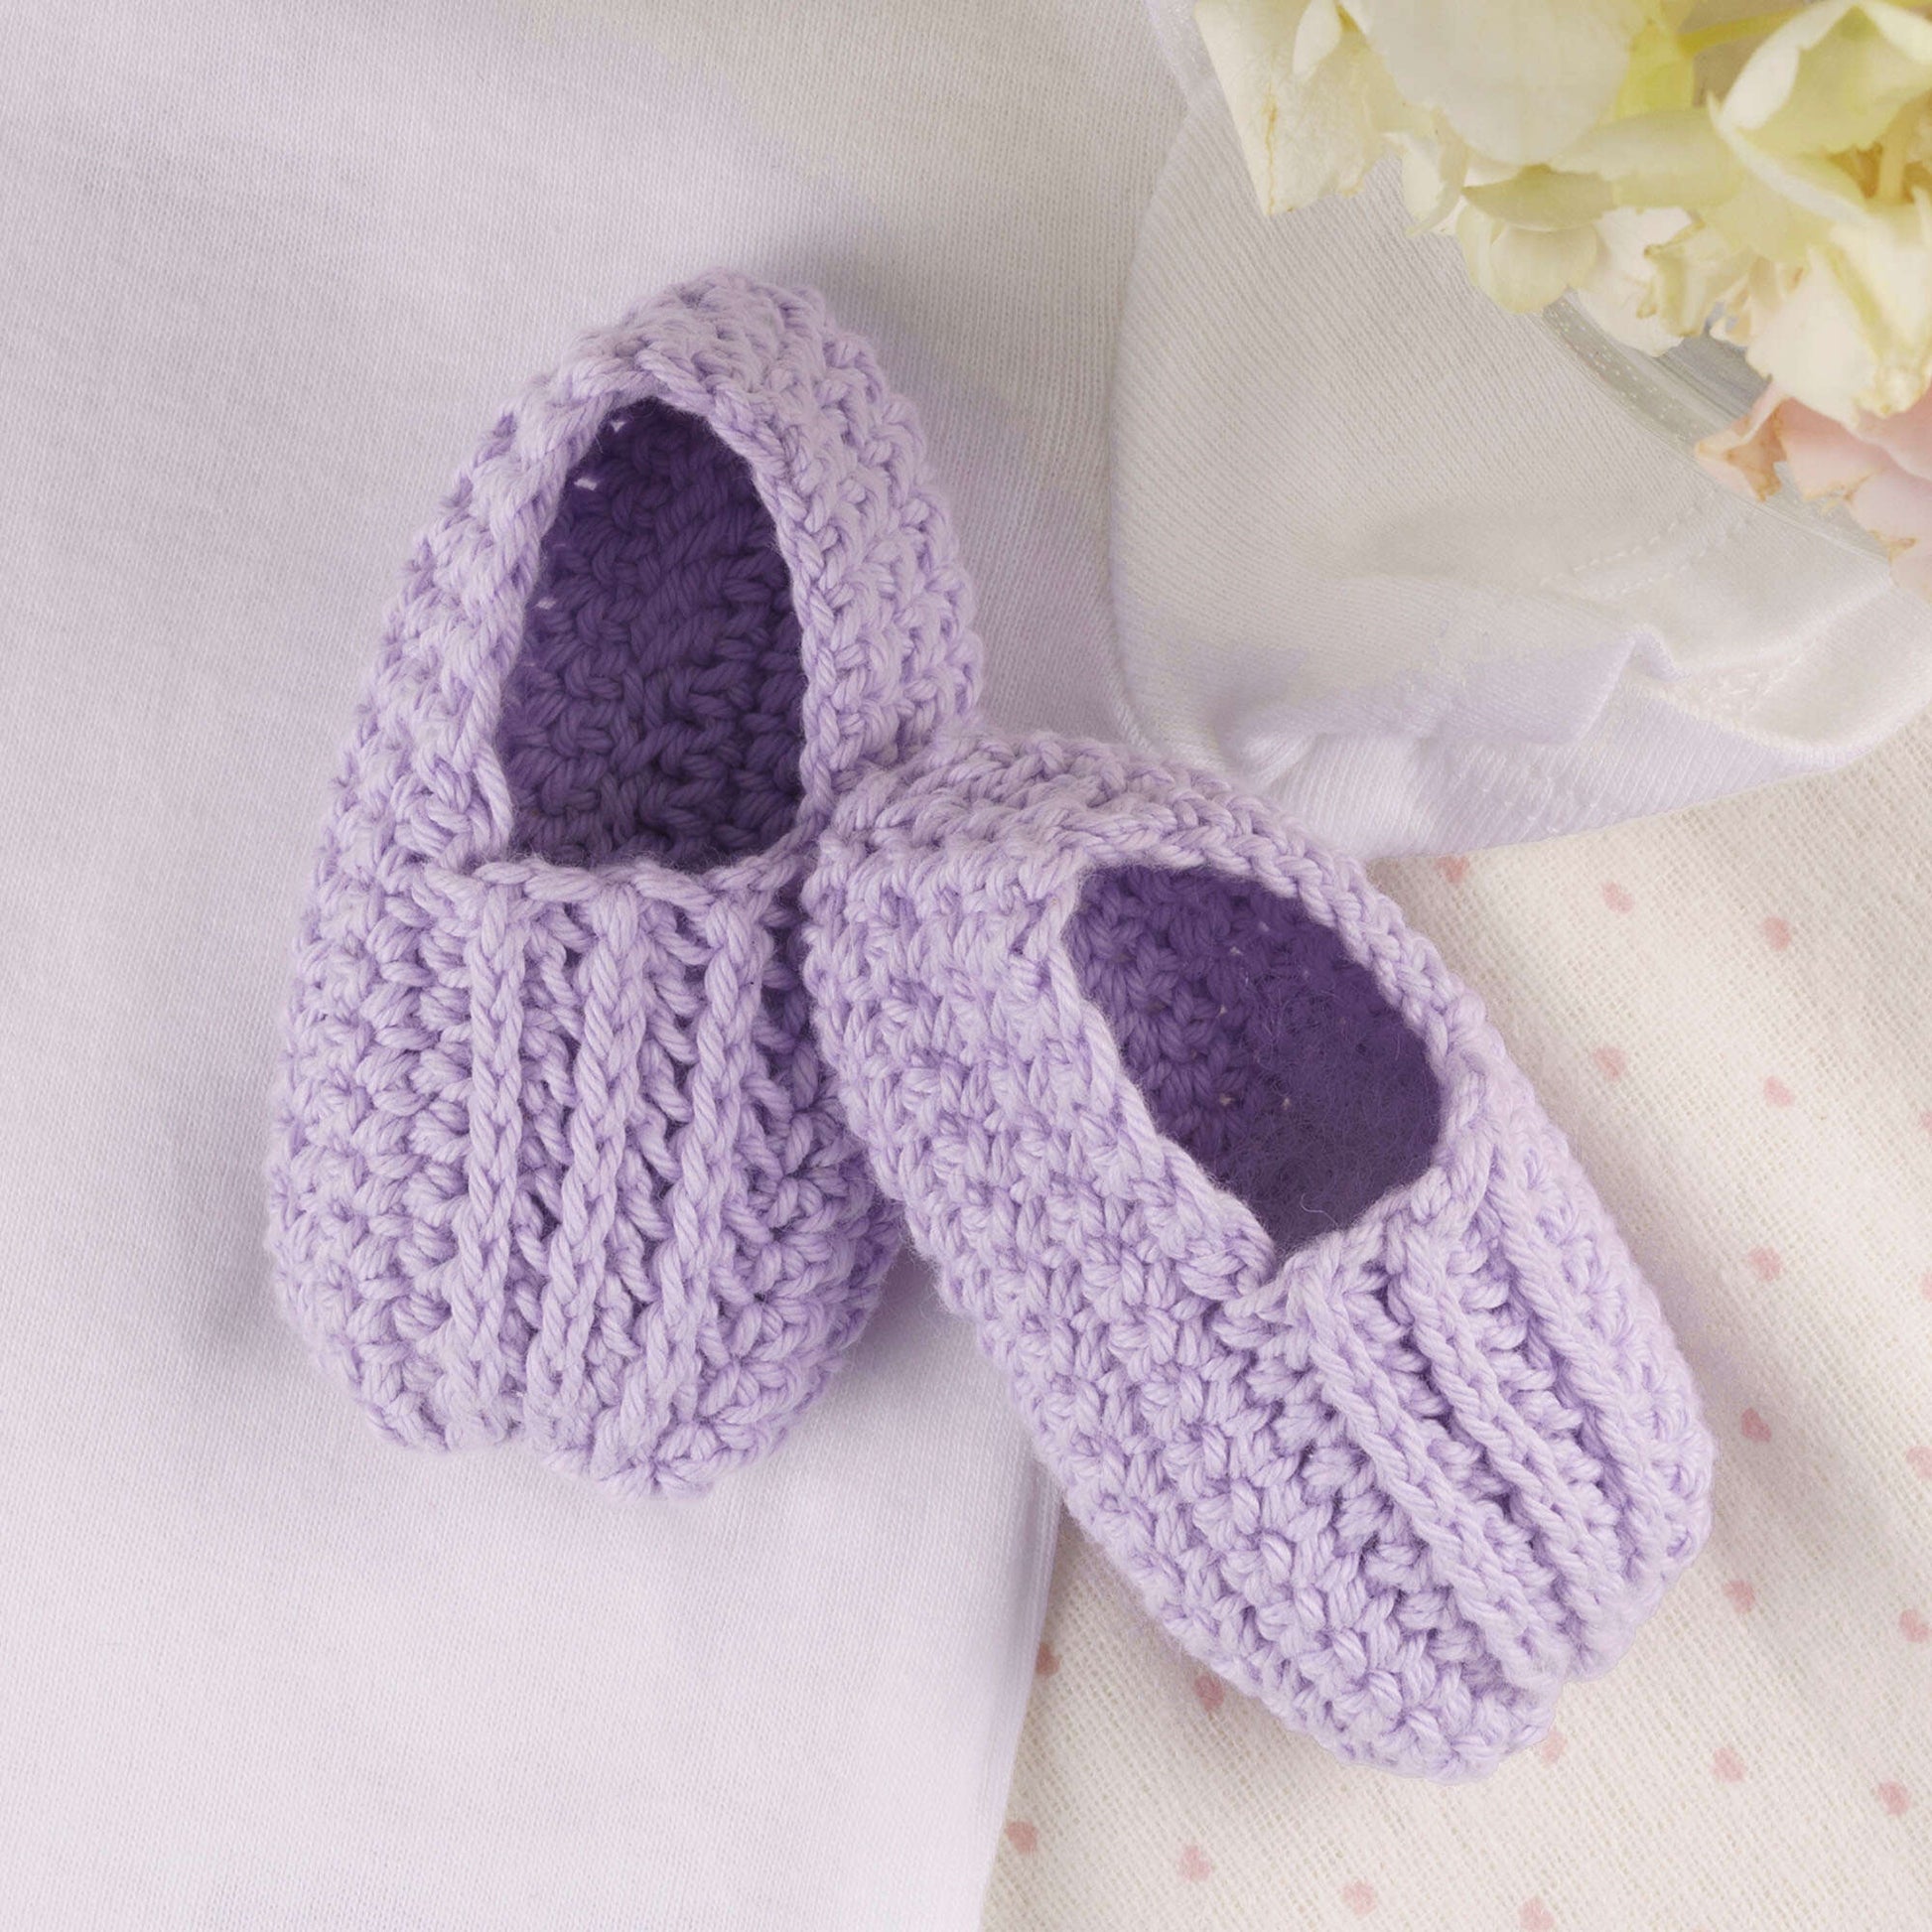 Free Aunt Crochet Lydia's Flat Booties with Inset Pattern